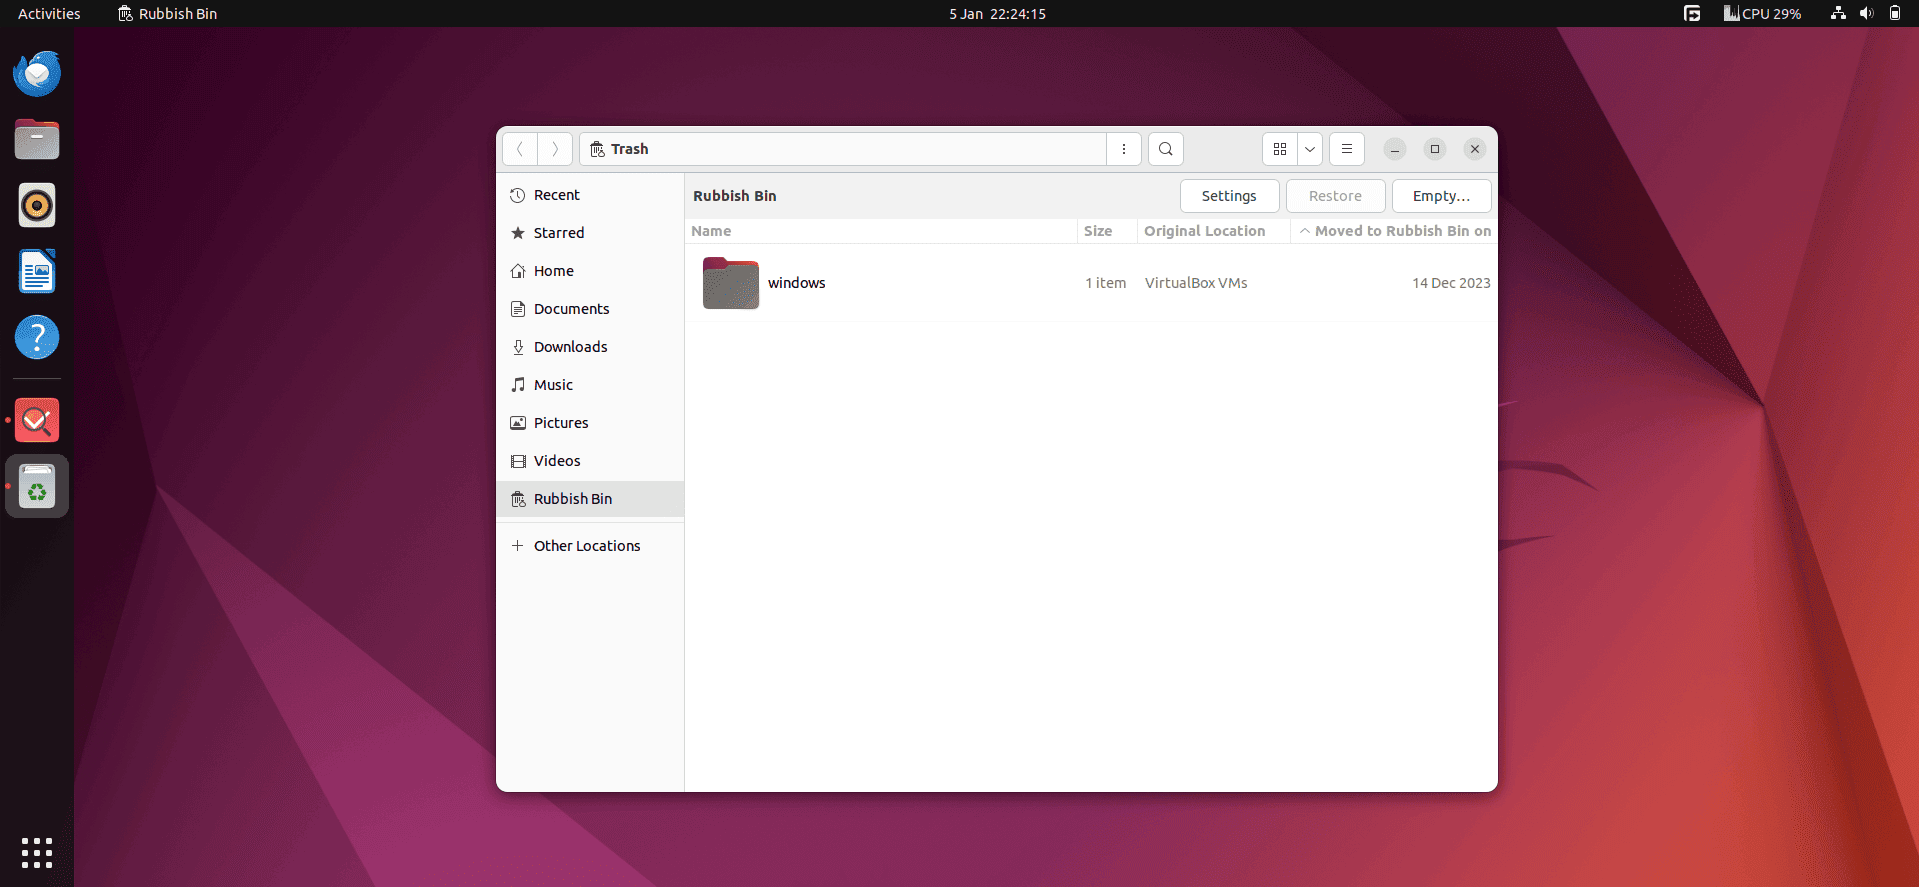 viewing rubbish bin at the center of the screen in linux